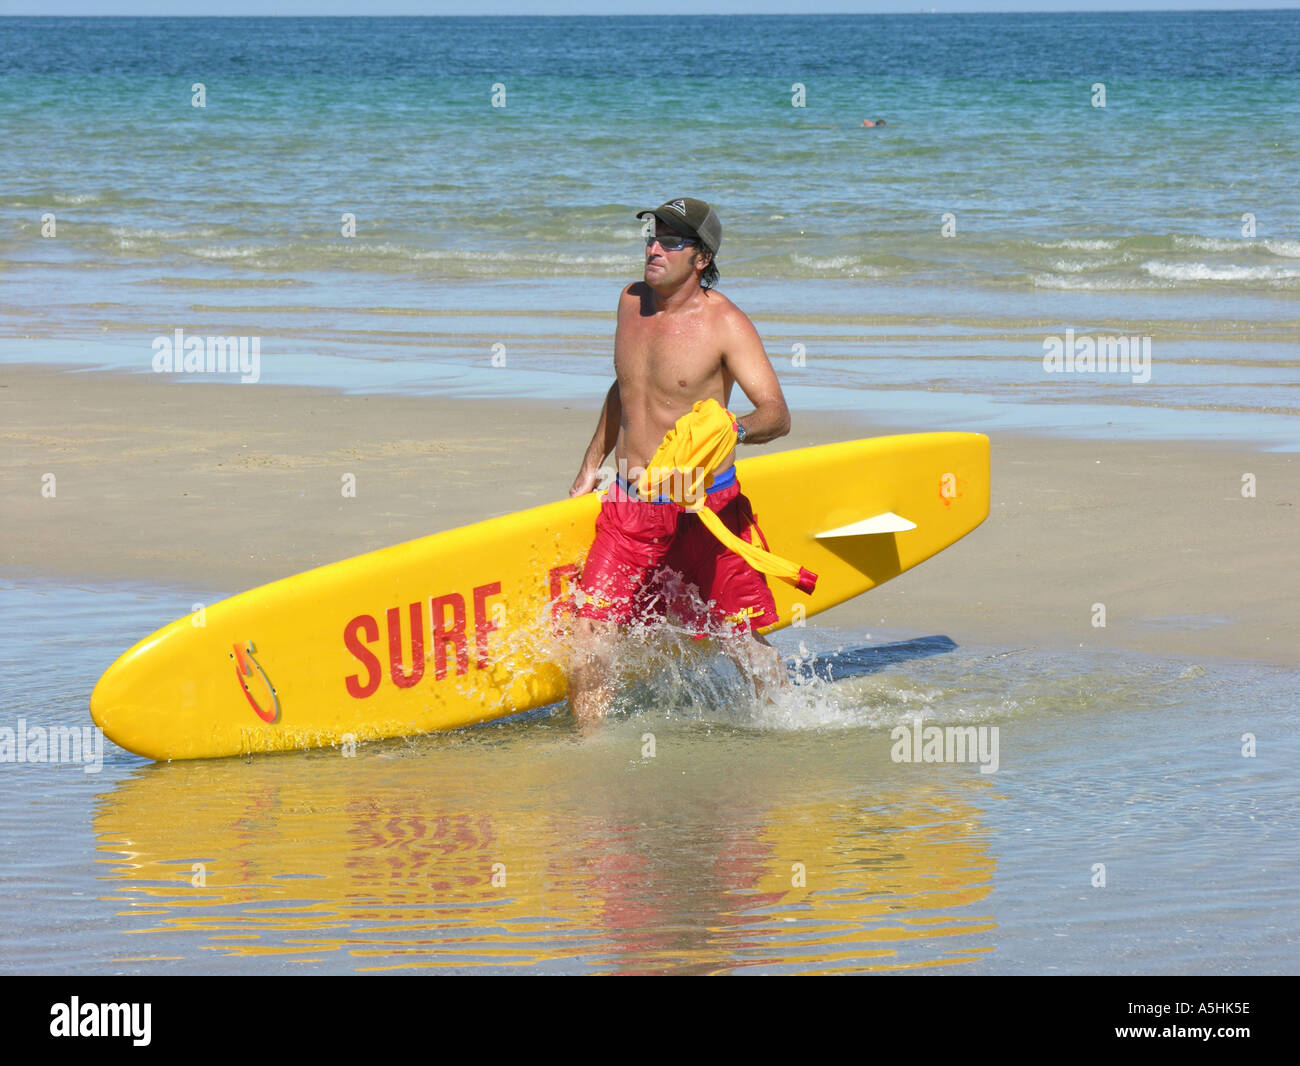 Surf lifesaver with surfboard walking back to shore Stock Photo